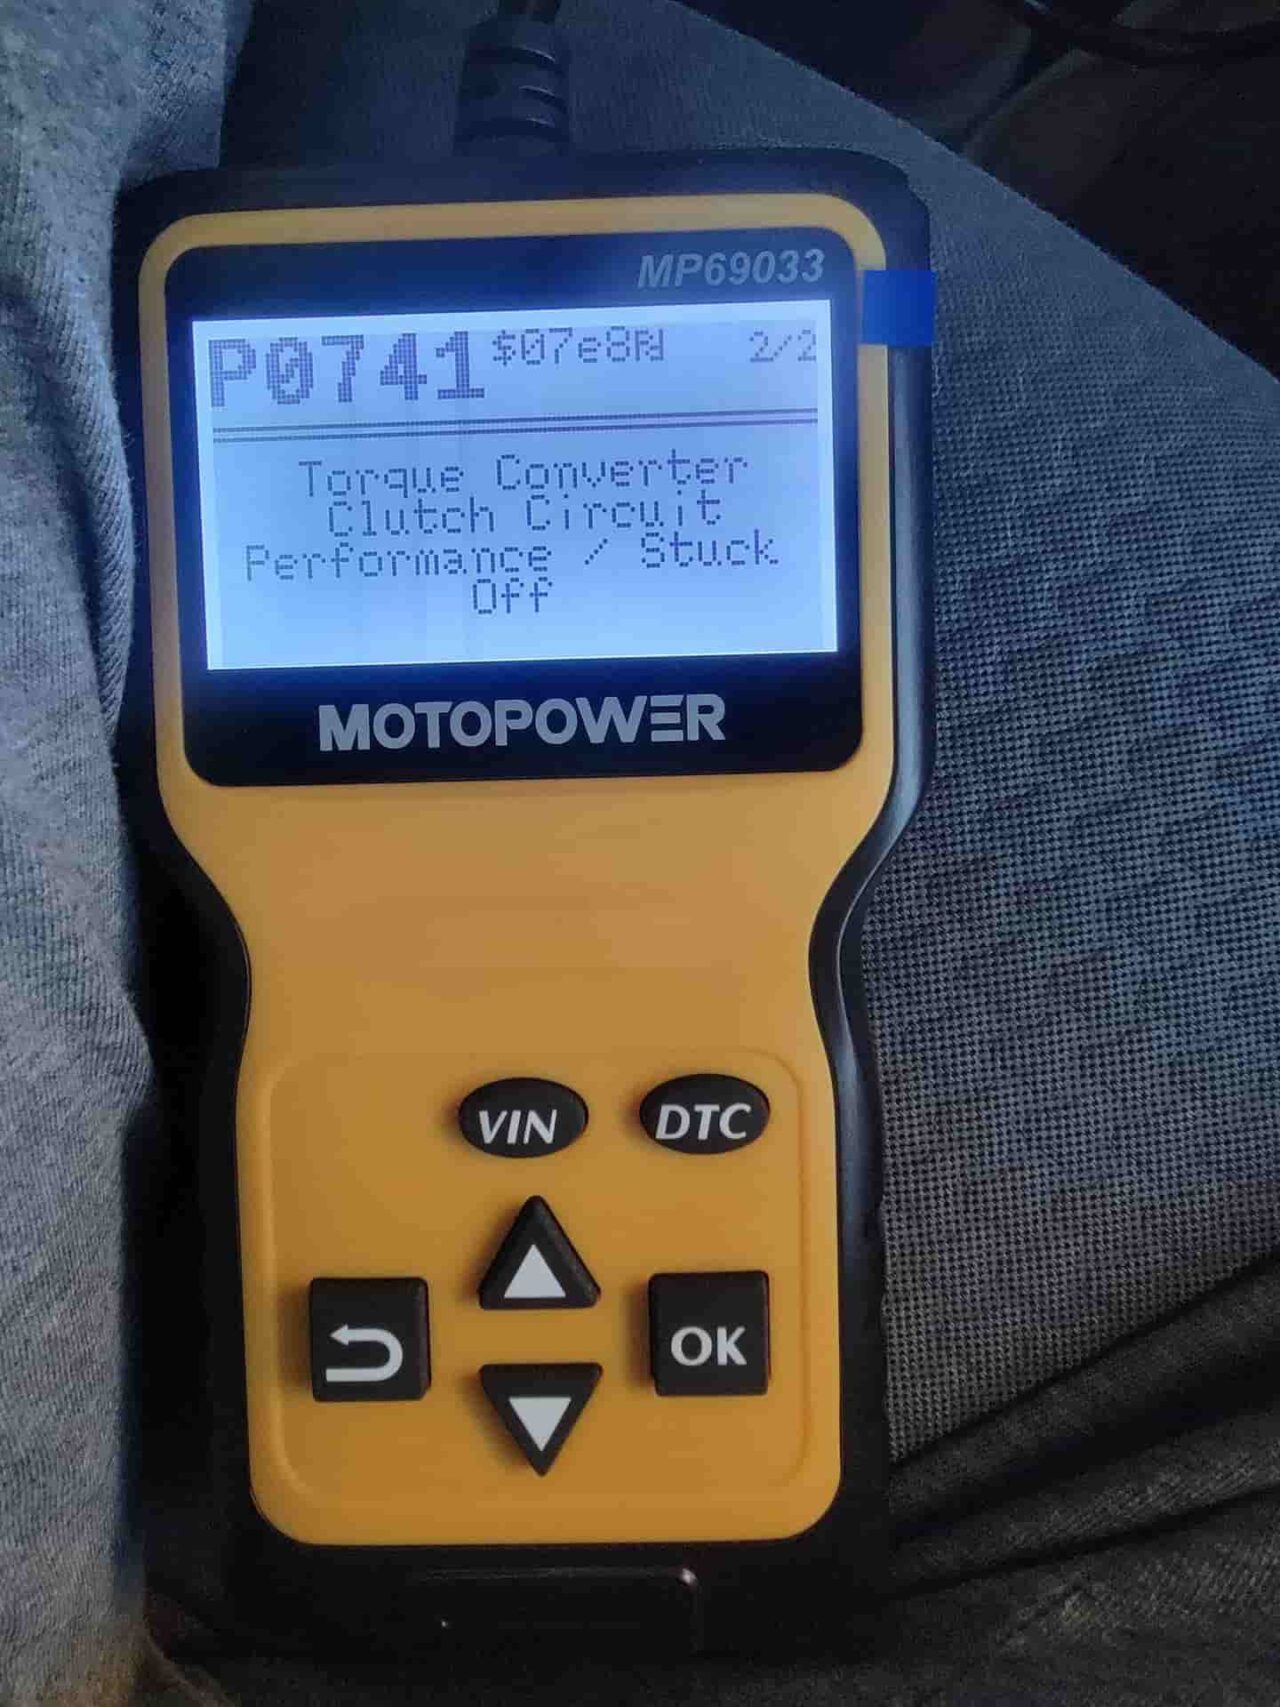 MOTOPOWER MP69033 gives a trouble code.